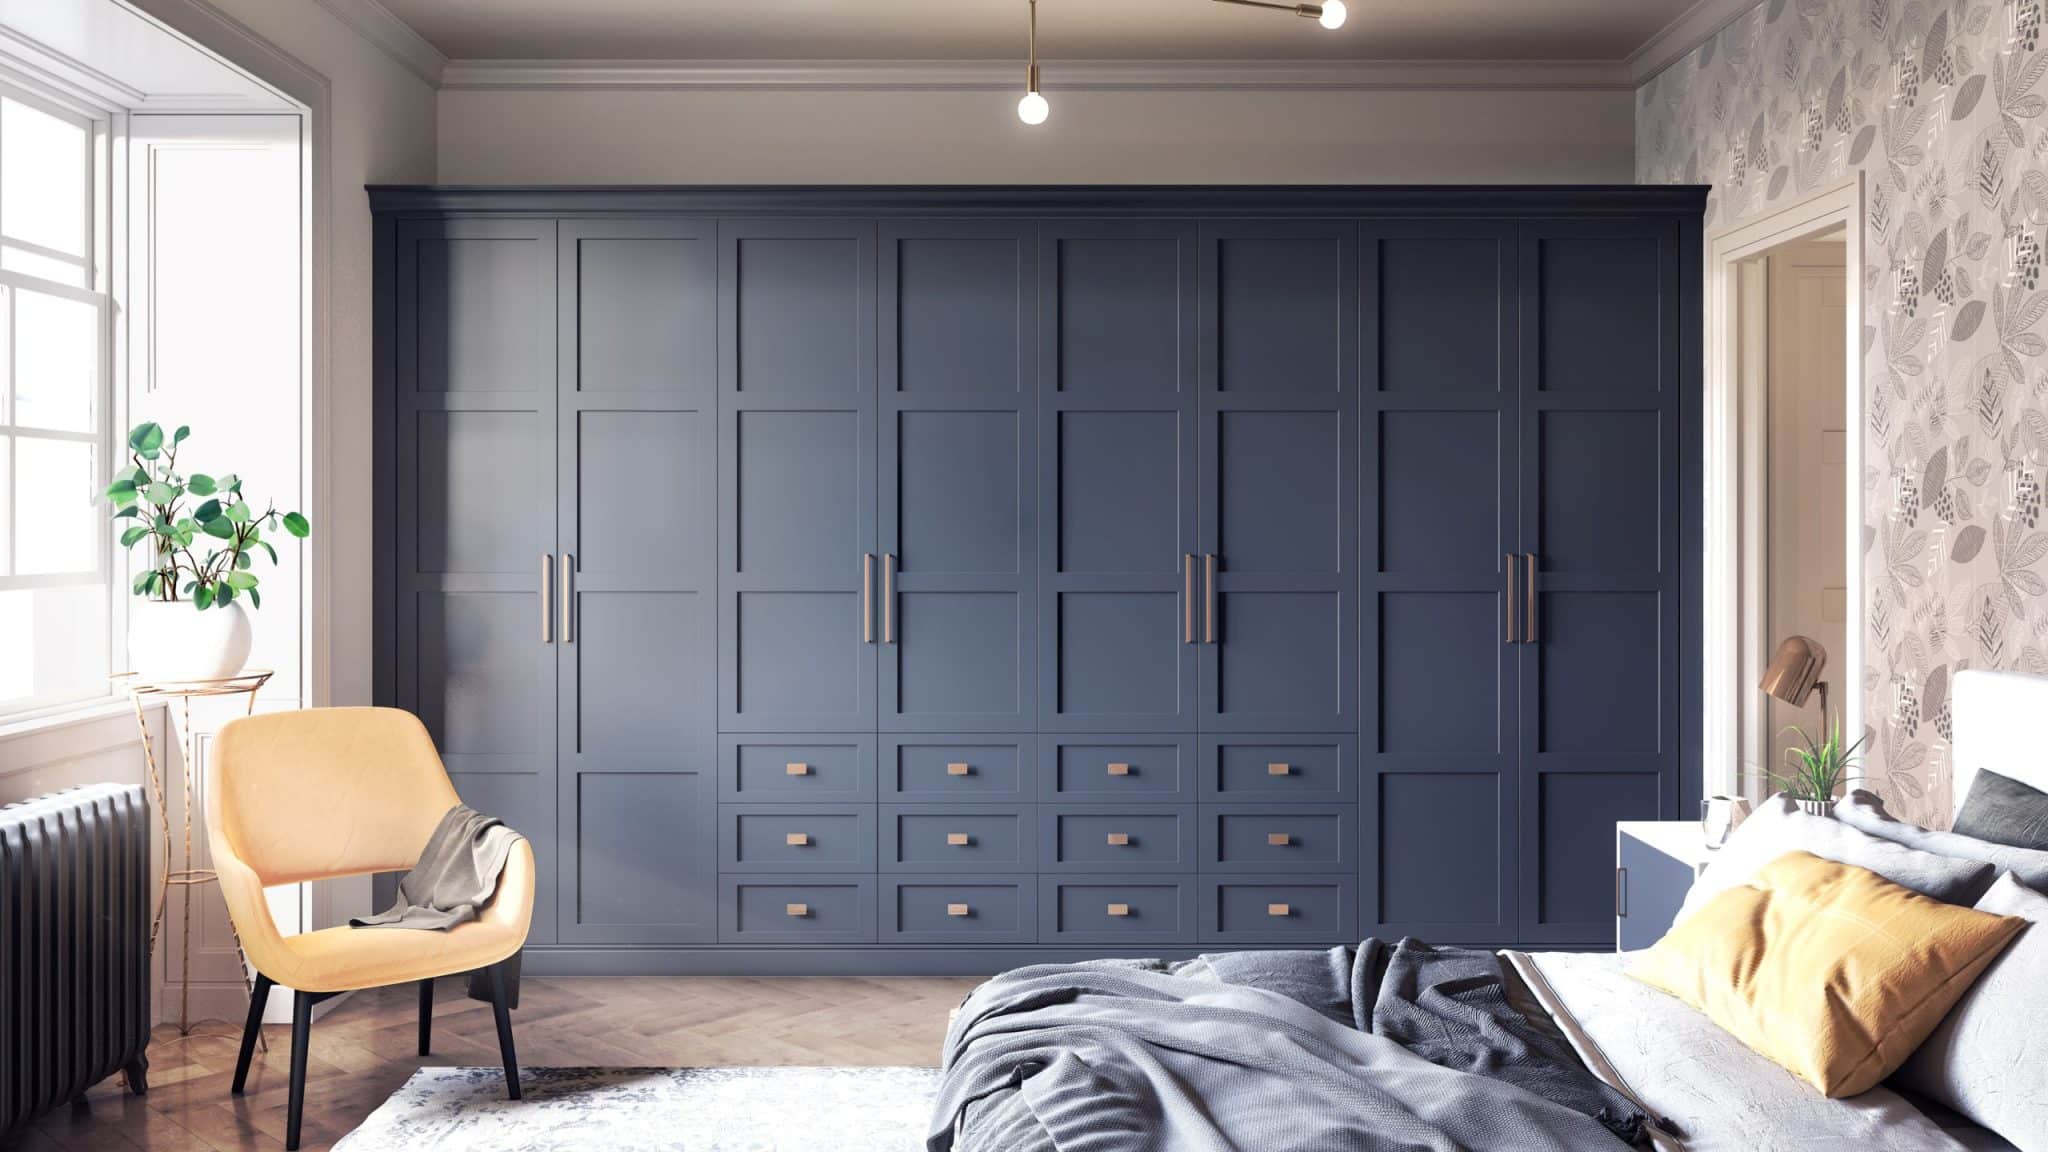 Go In for a Built-in Wardrobe neutral bedroom ideas